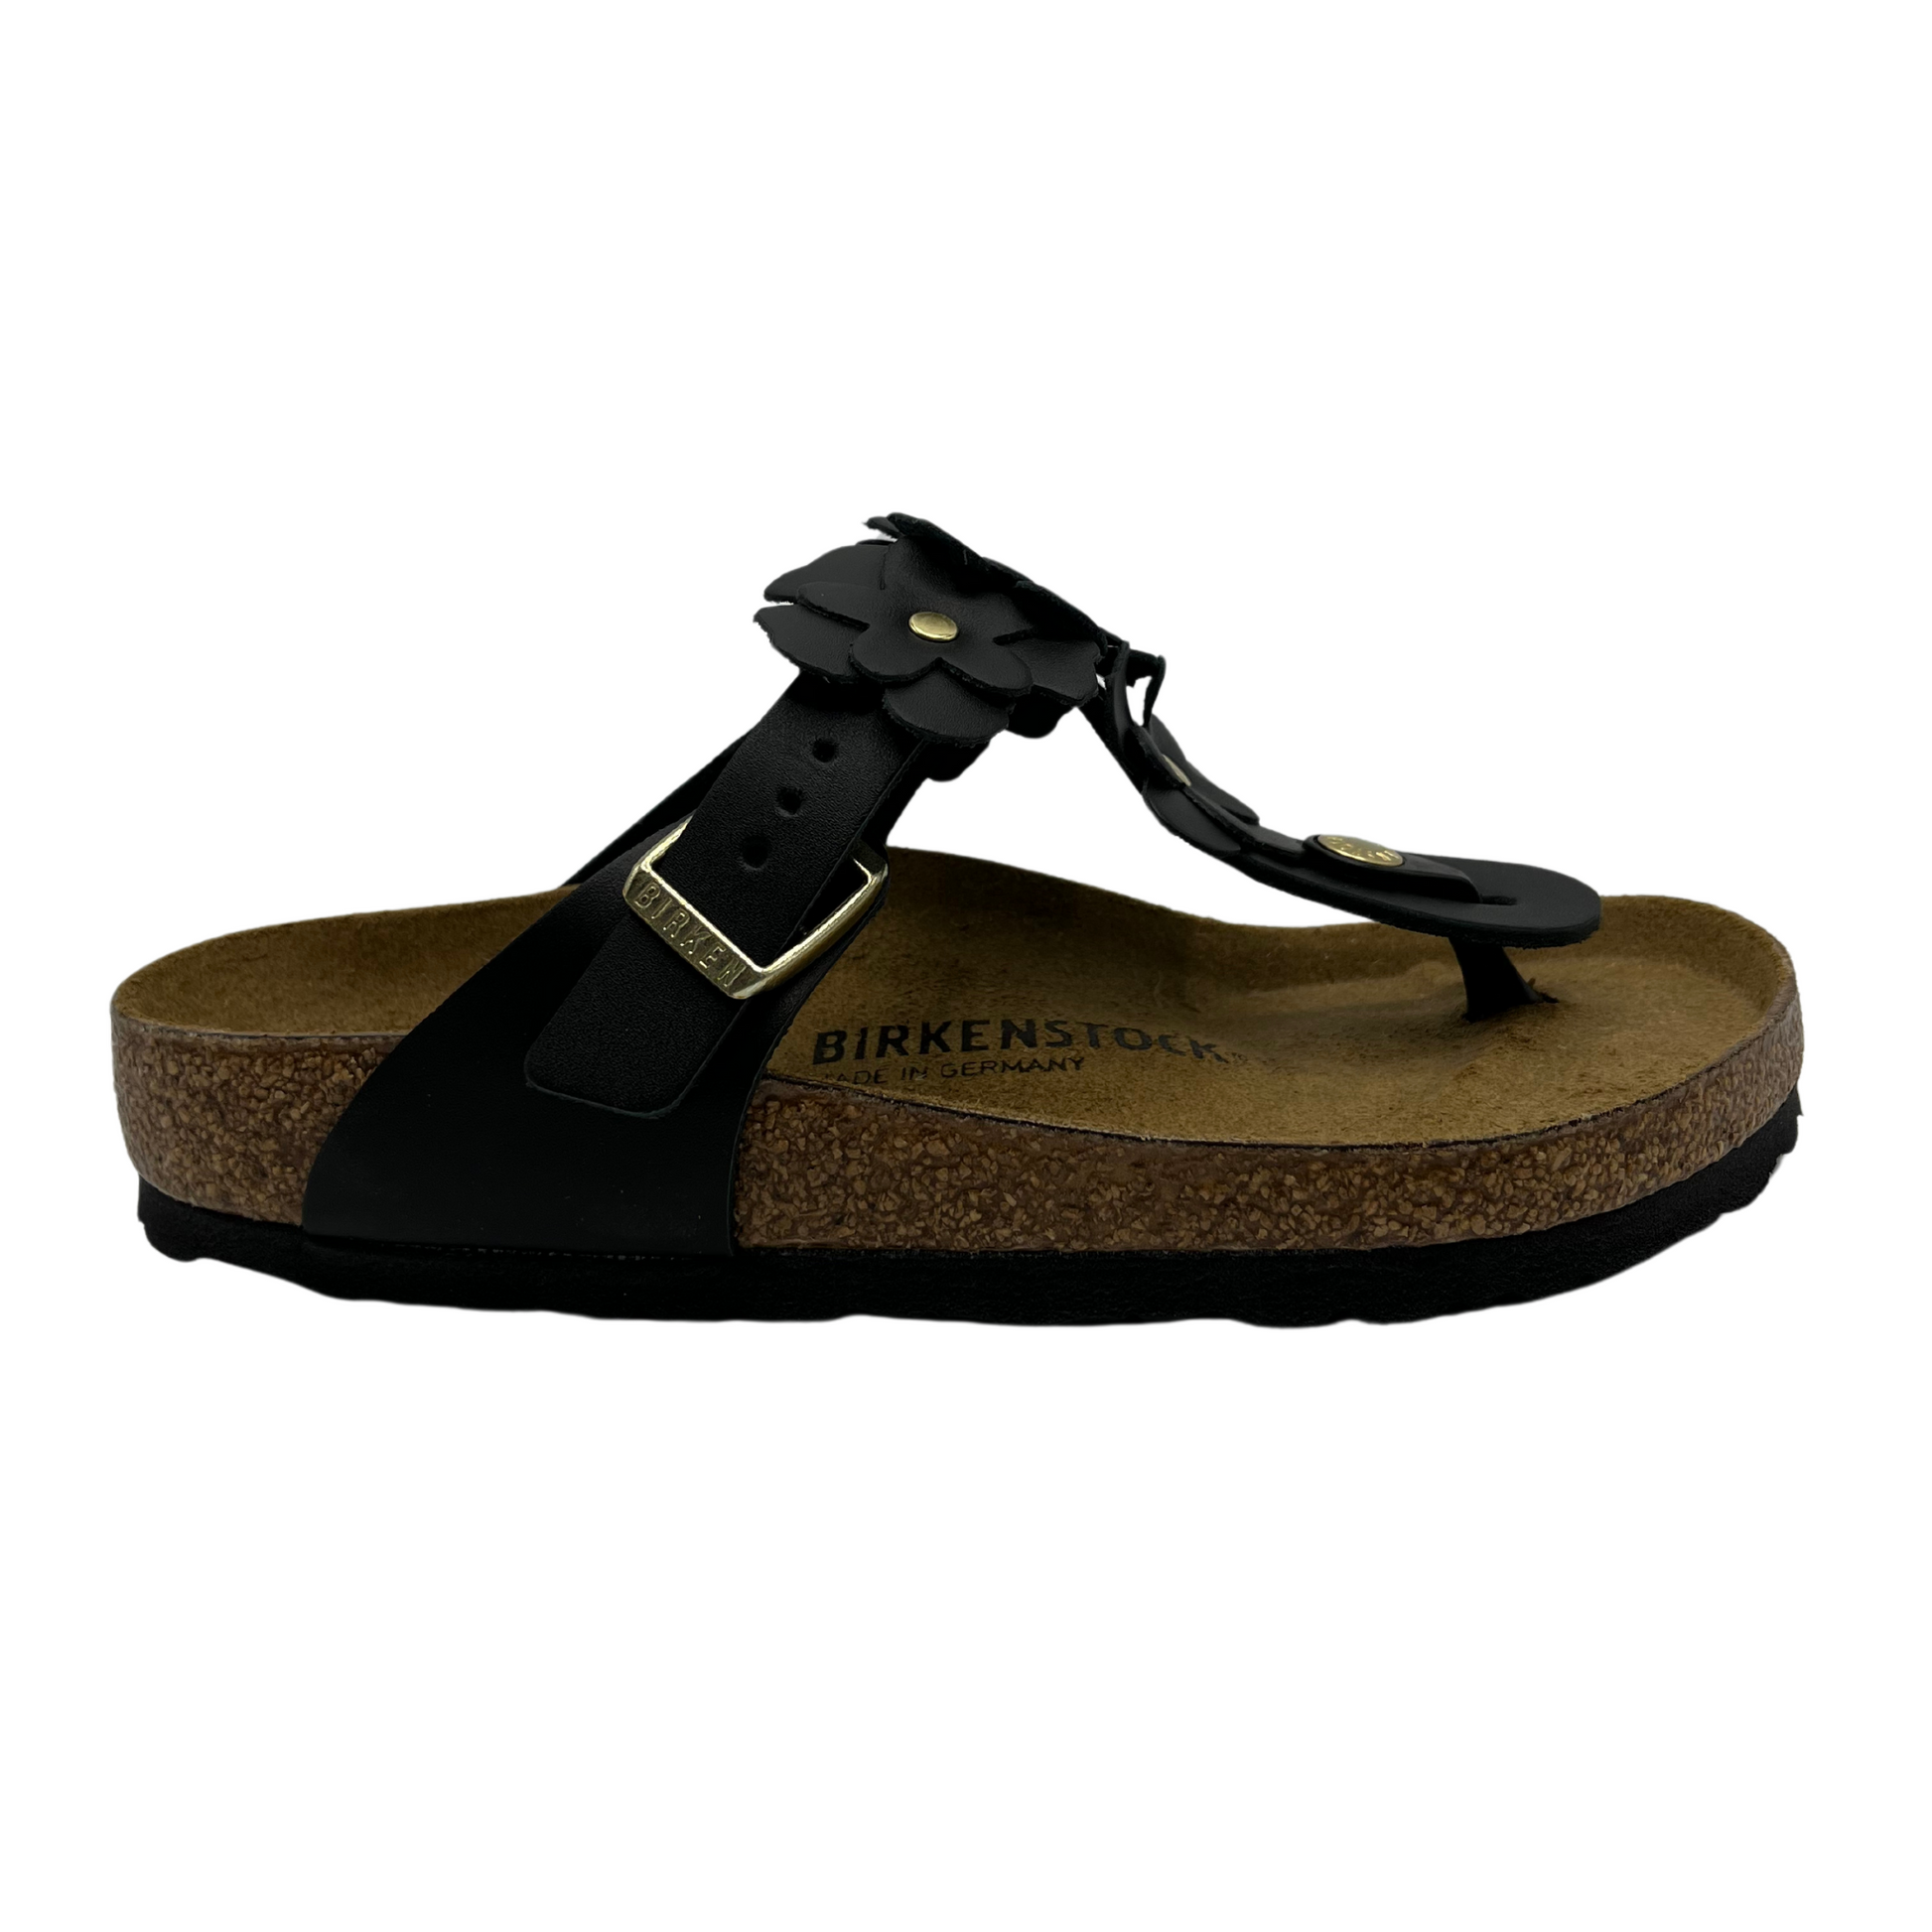 Right facing view of black leather sandals with flower shaped details and adjustable strap